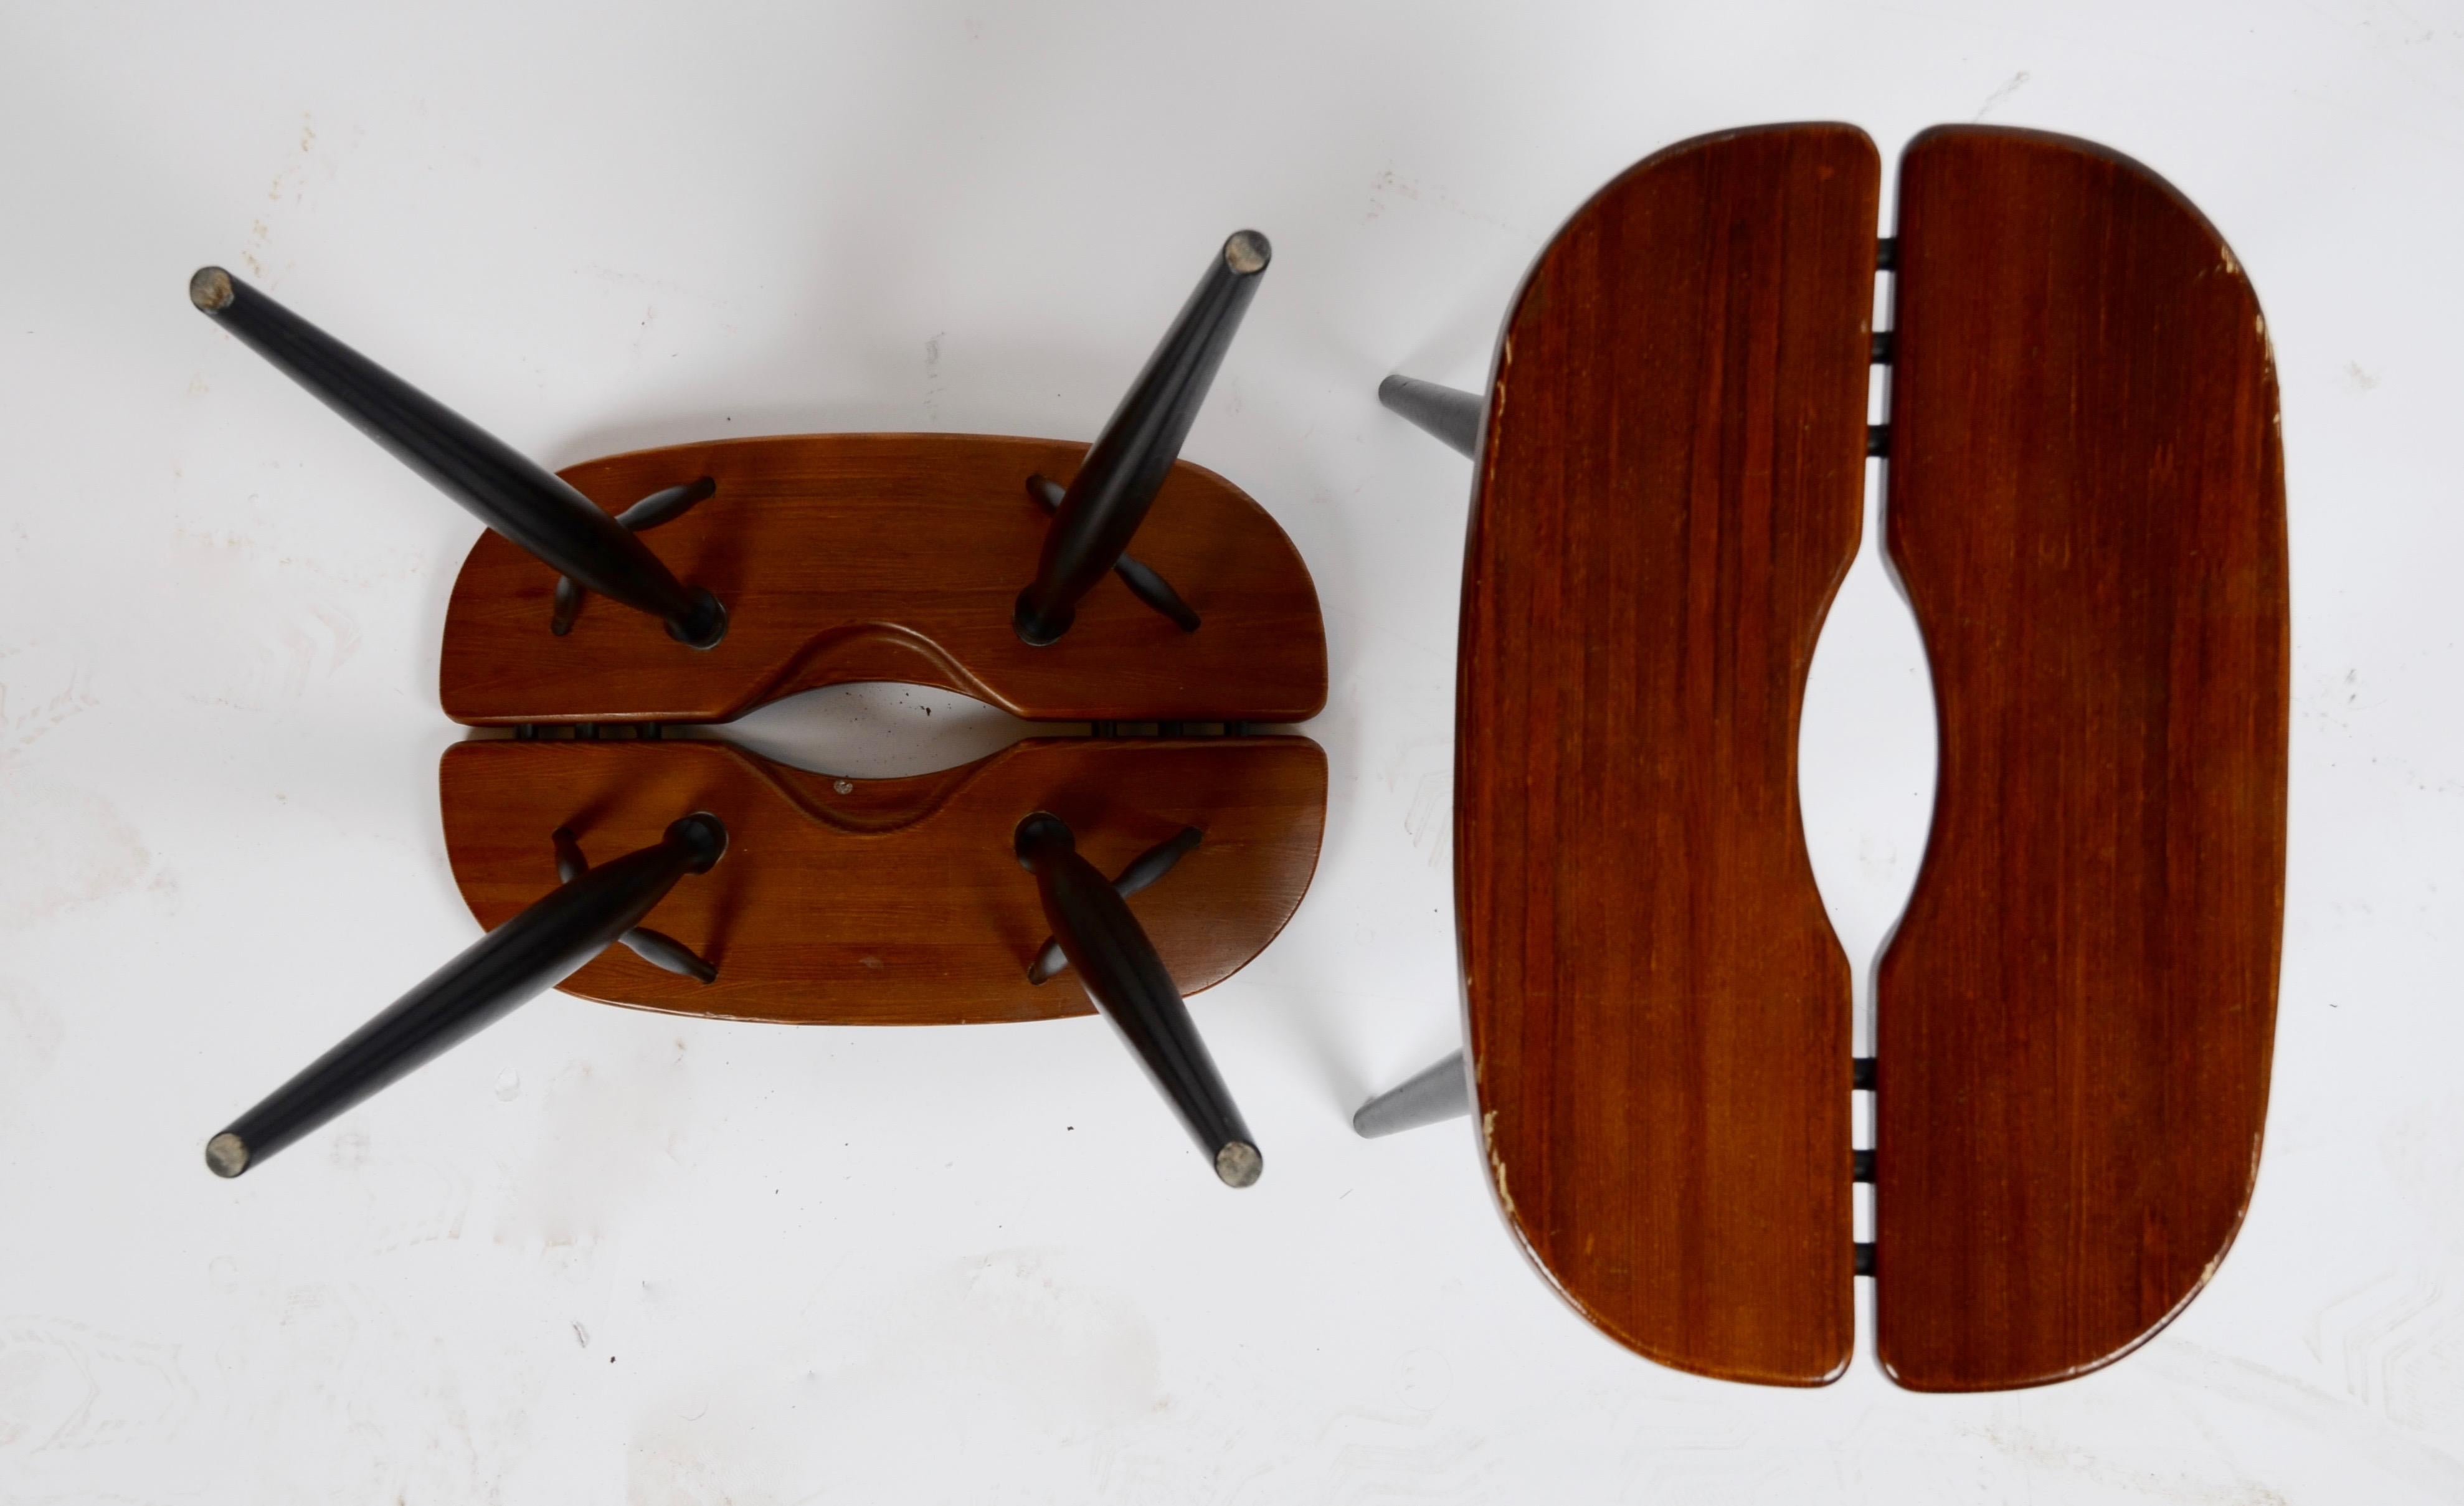 Four stools, model Pirkka designed by Imari Tapiovaara, Finland, 1970s.

Dining set also available, 4 pieces. See last two pictures.